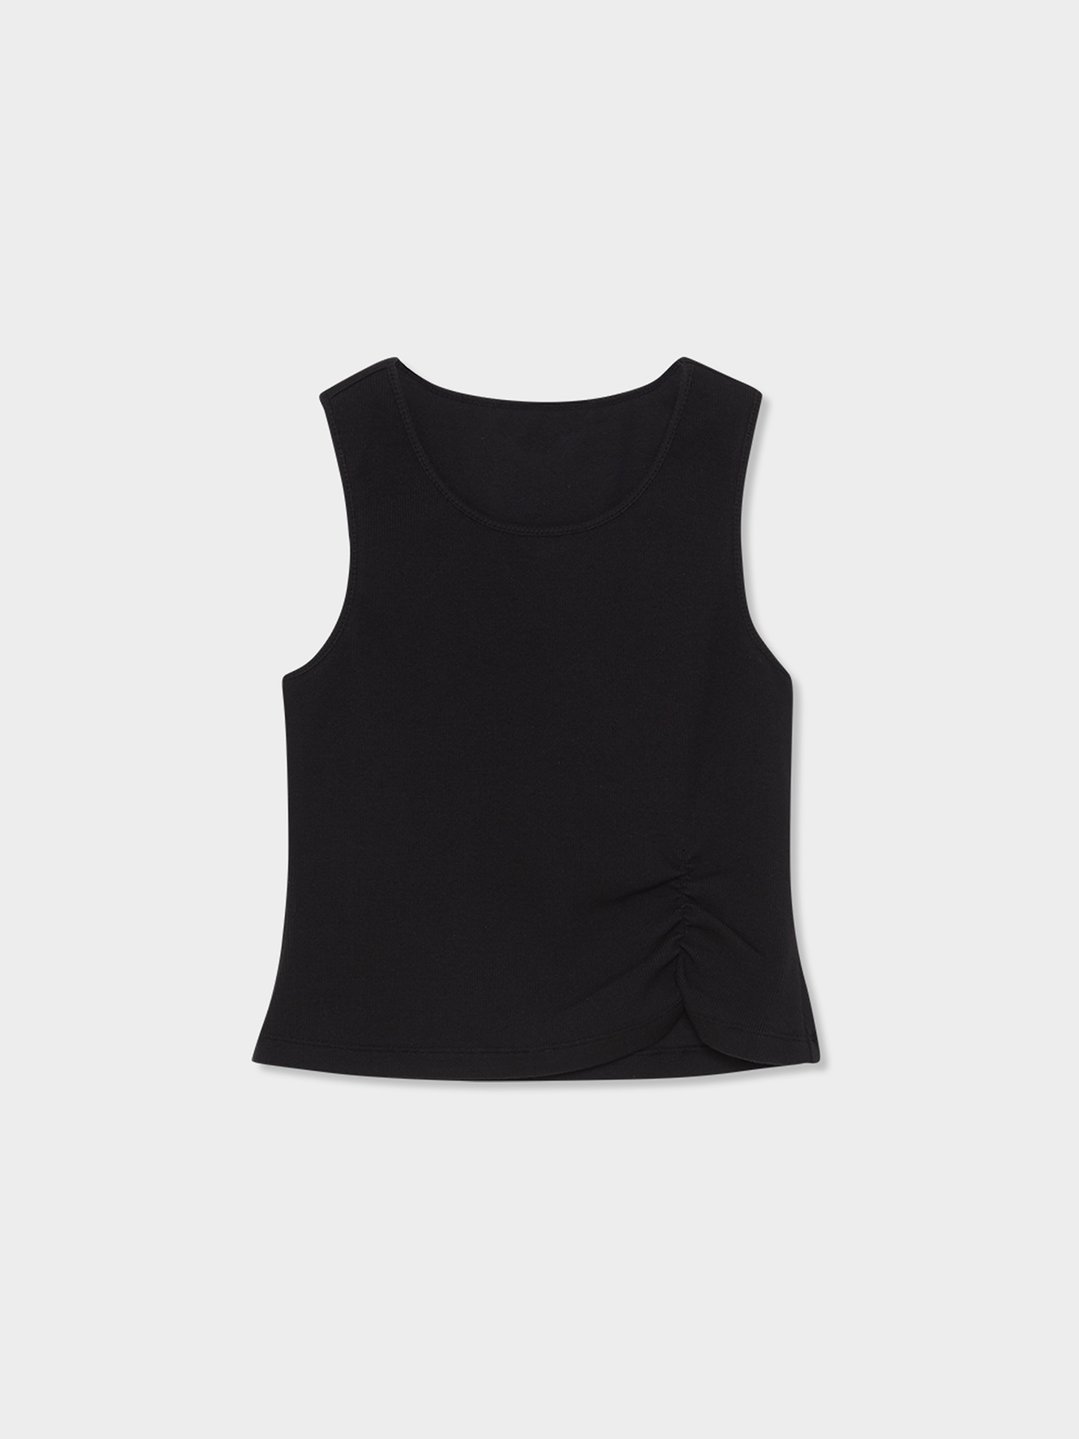 Sustainable Stitched Tank Top - Black - Pomelo Fashion